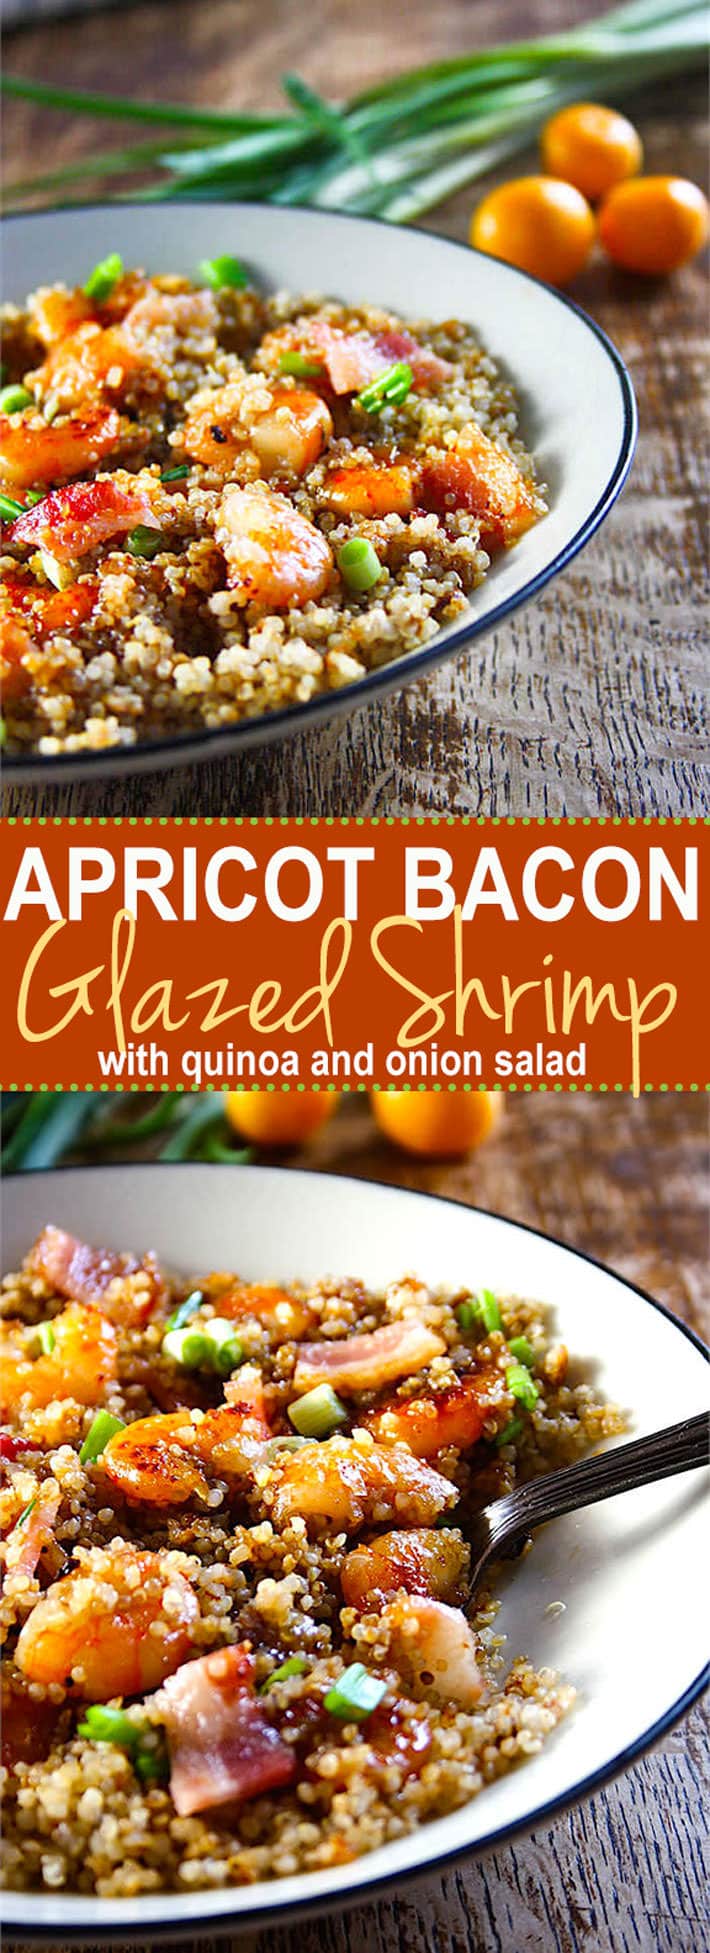 Apricot Bacon Glazed shrimp - A super EASY and flavorful shrimp dish that your whole family will love! It's gluten Free, healthy, and has a sweet savory sauce to DIE FOR!